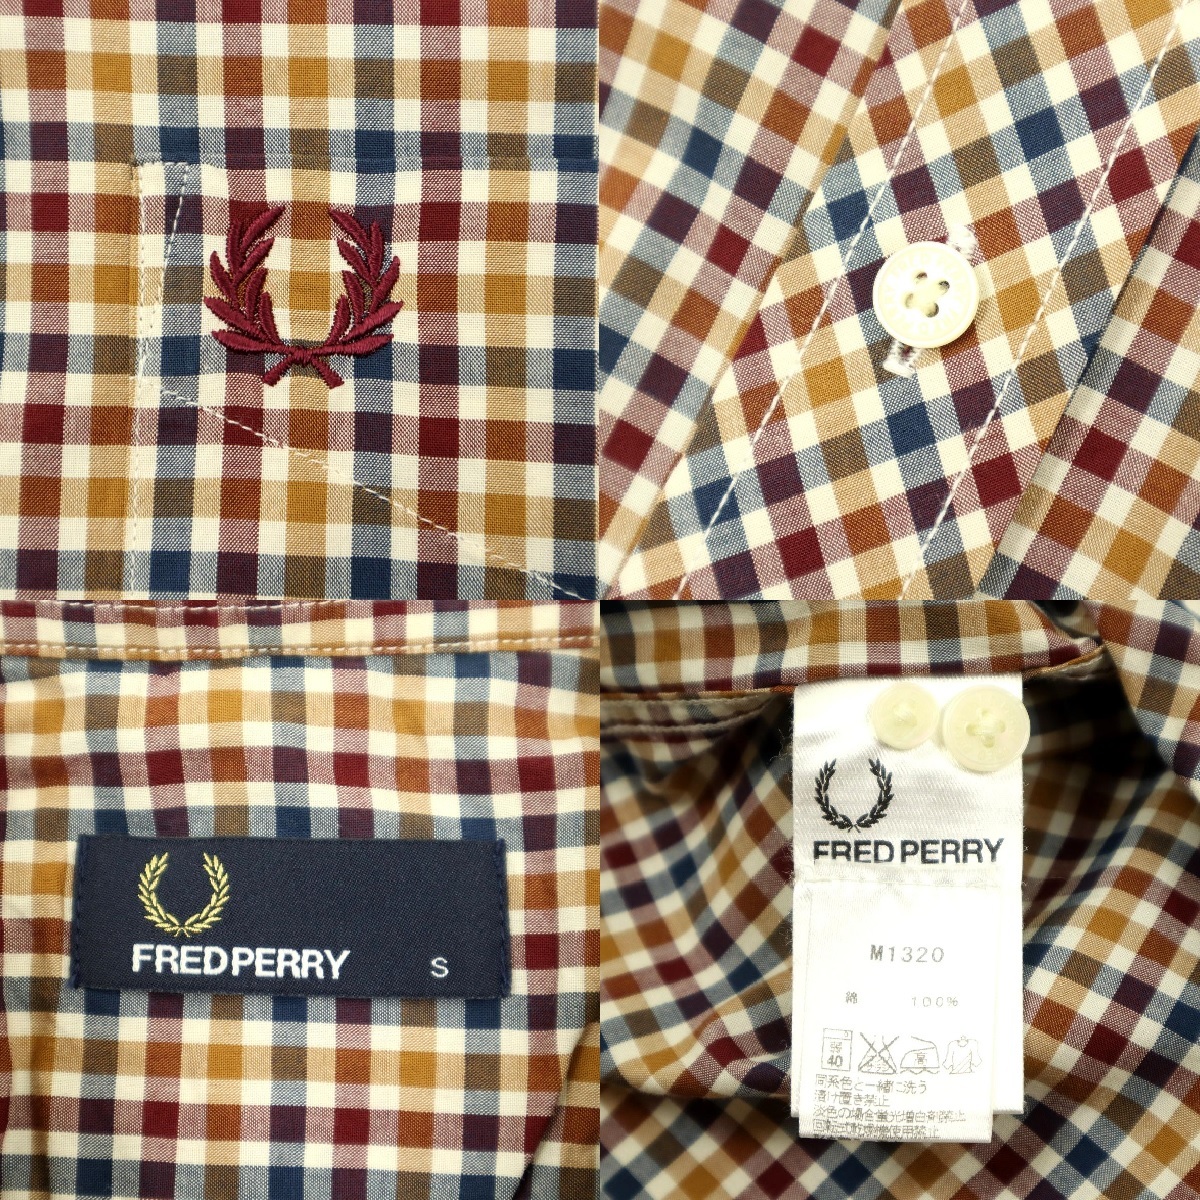 [B2427][ as good as new ]FRED PERRY Fred Perry long sleeve shirt button down shirt silver chewing gum check M1320 size M